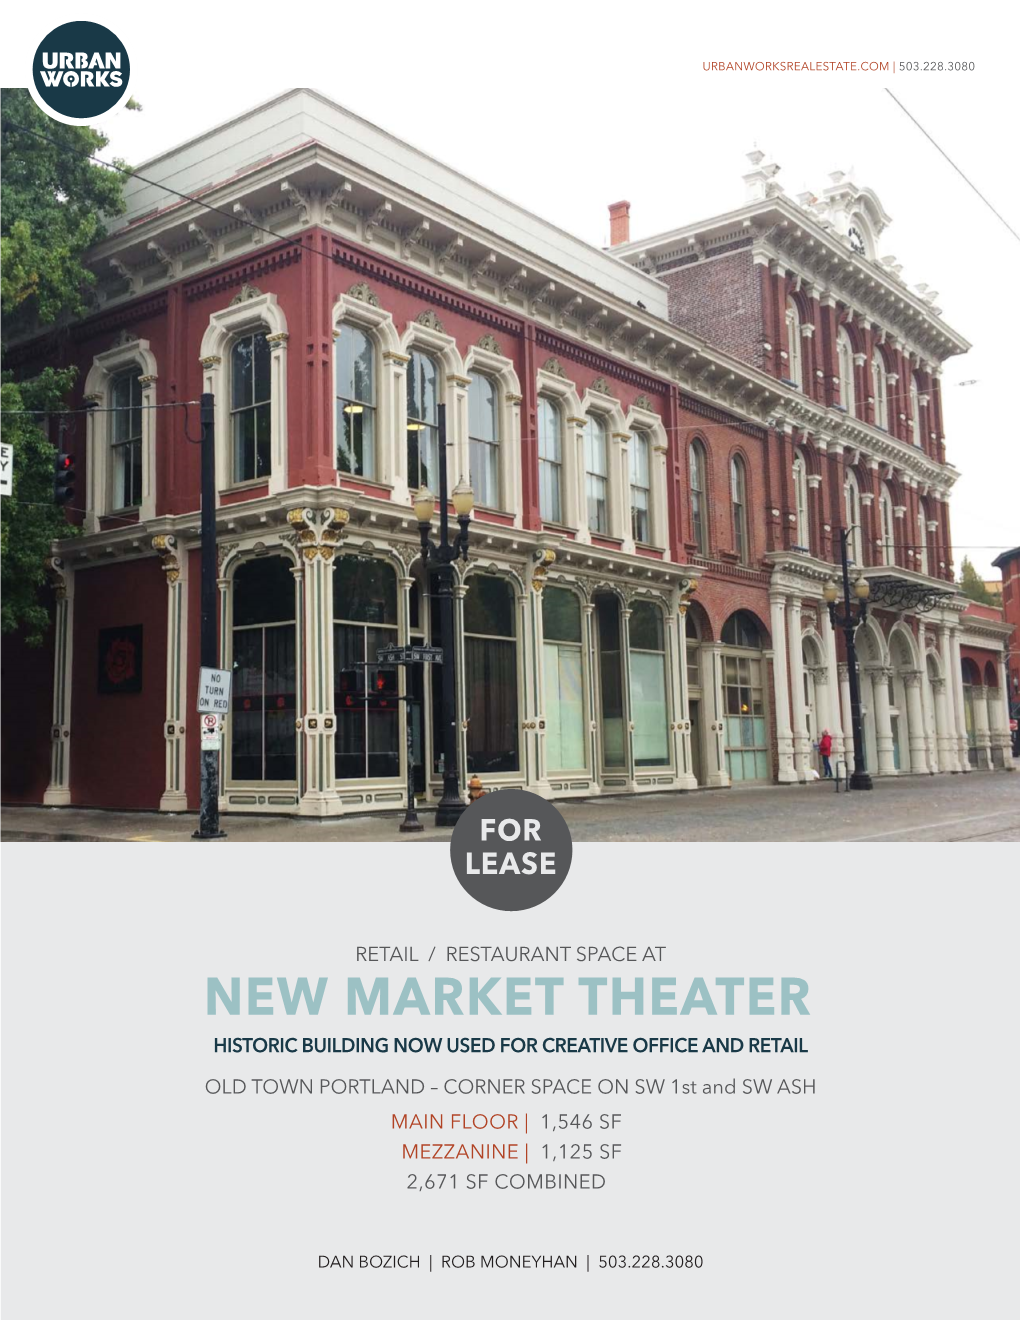 New Market Theater Historic Building Now Used for Creative Office and Retail